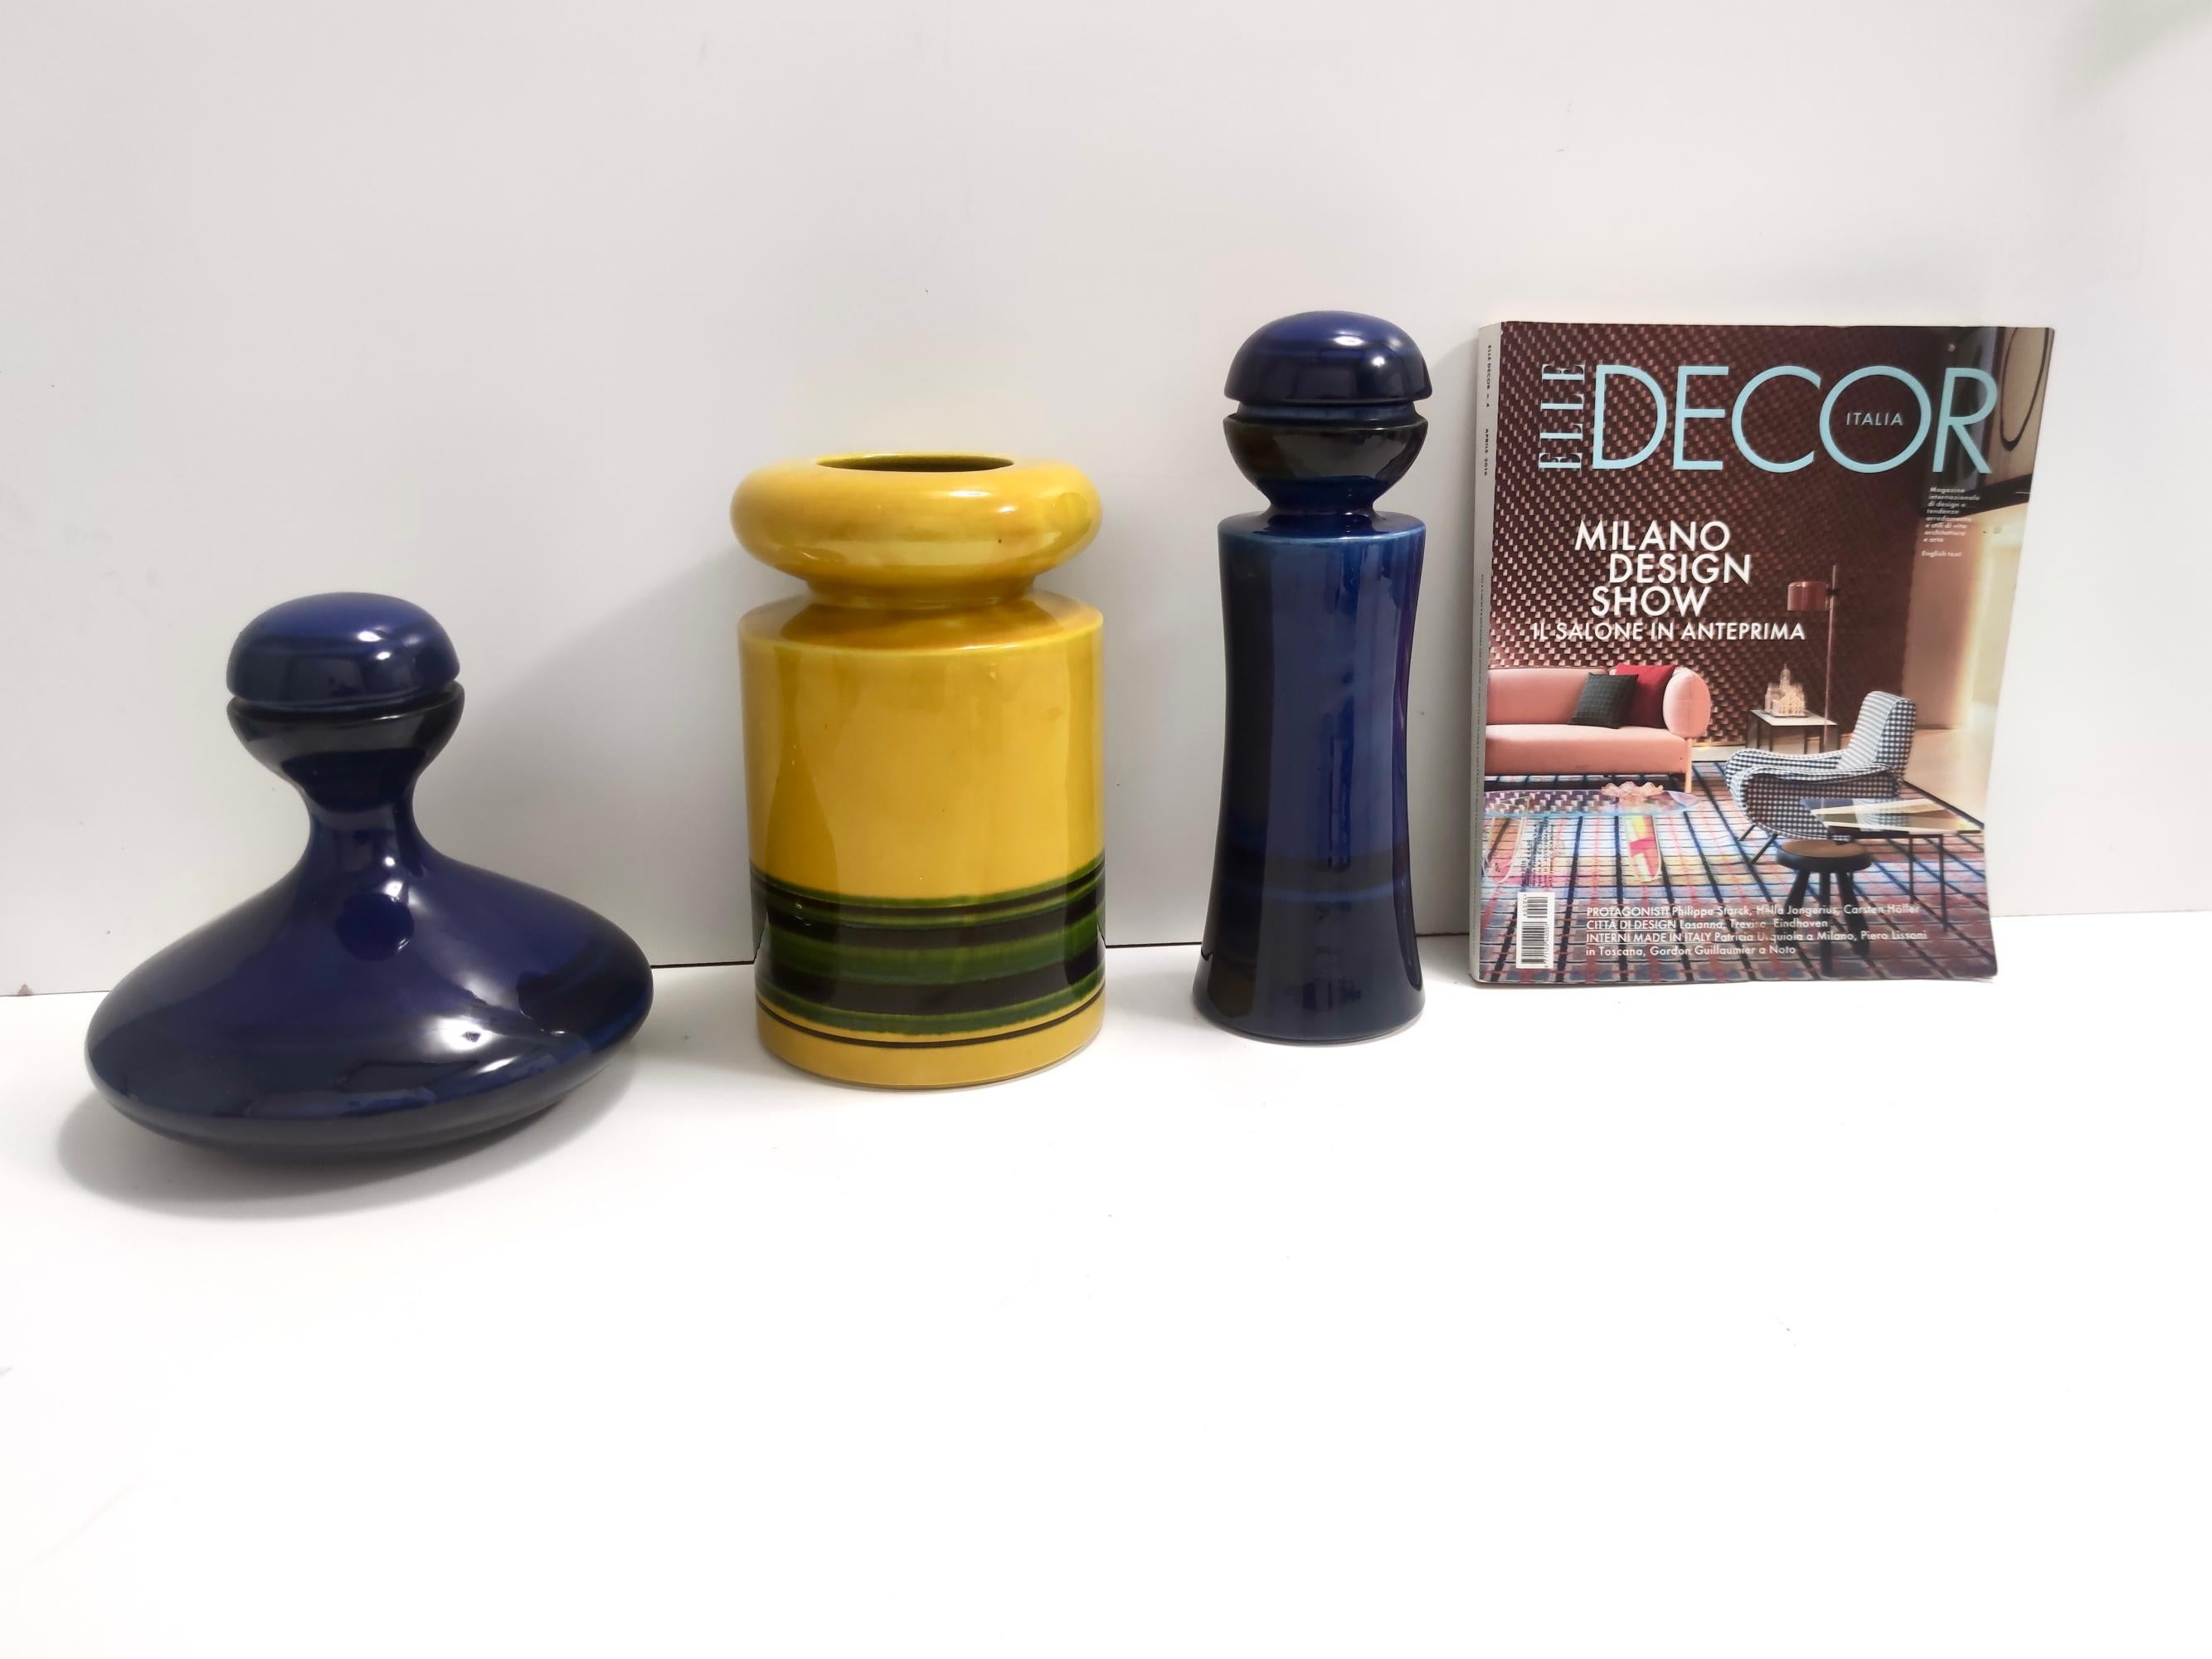 Made in Italy, 1970s.
These two blue bottles and yellow vase are made in glazed ceramic by Parravicini.
Parravicini is not very known as a company, therefore it's not easy to find info about them, but they produce high-quality pieces. 
This is a